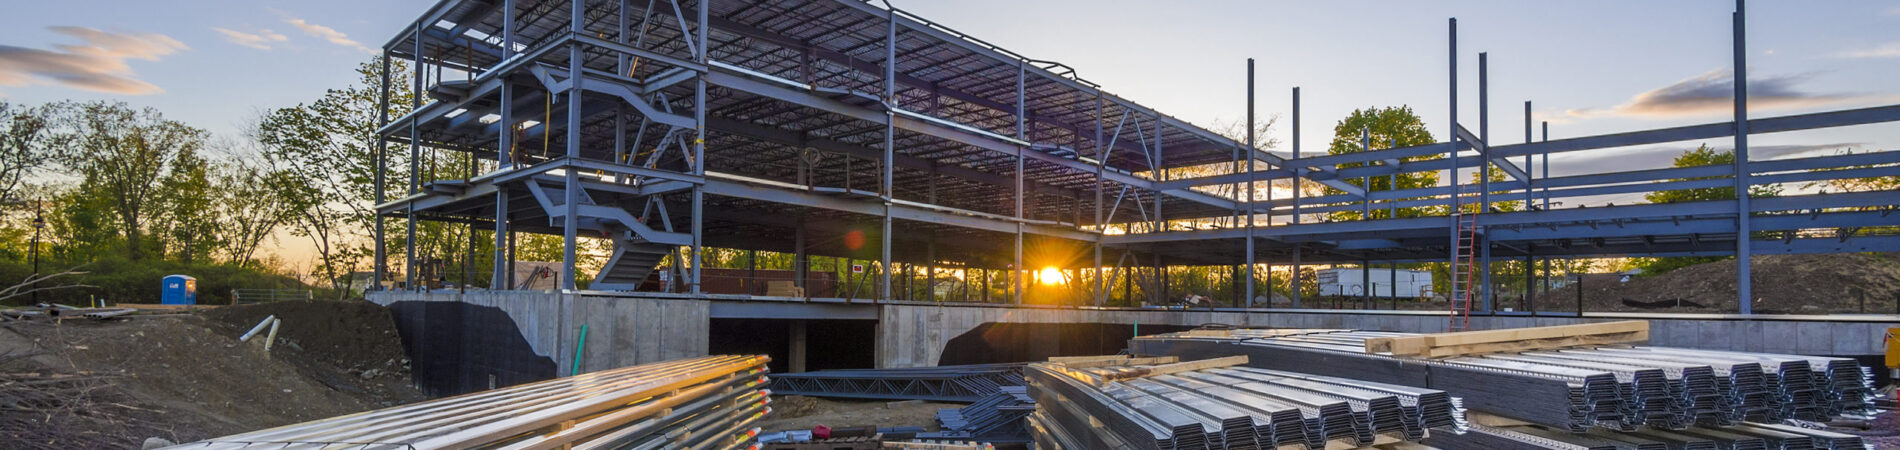 Construction site with steel flooring in front of a  partially erected building at sunset